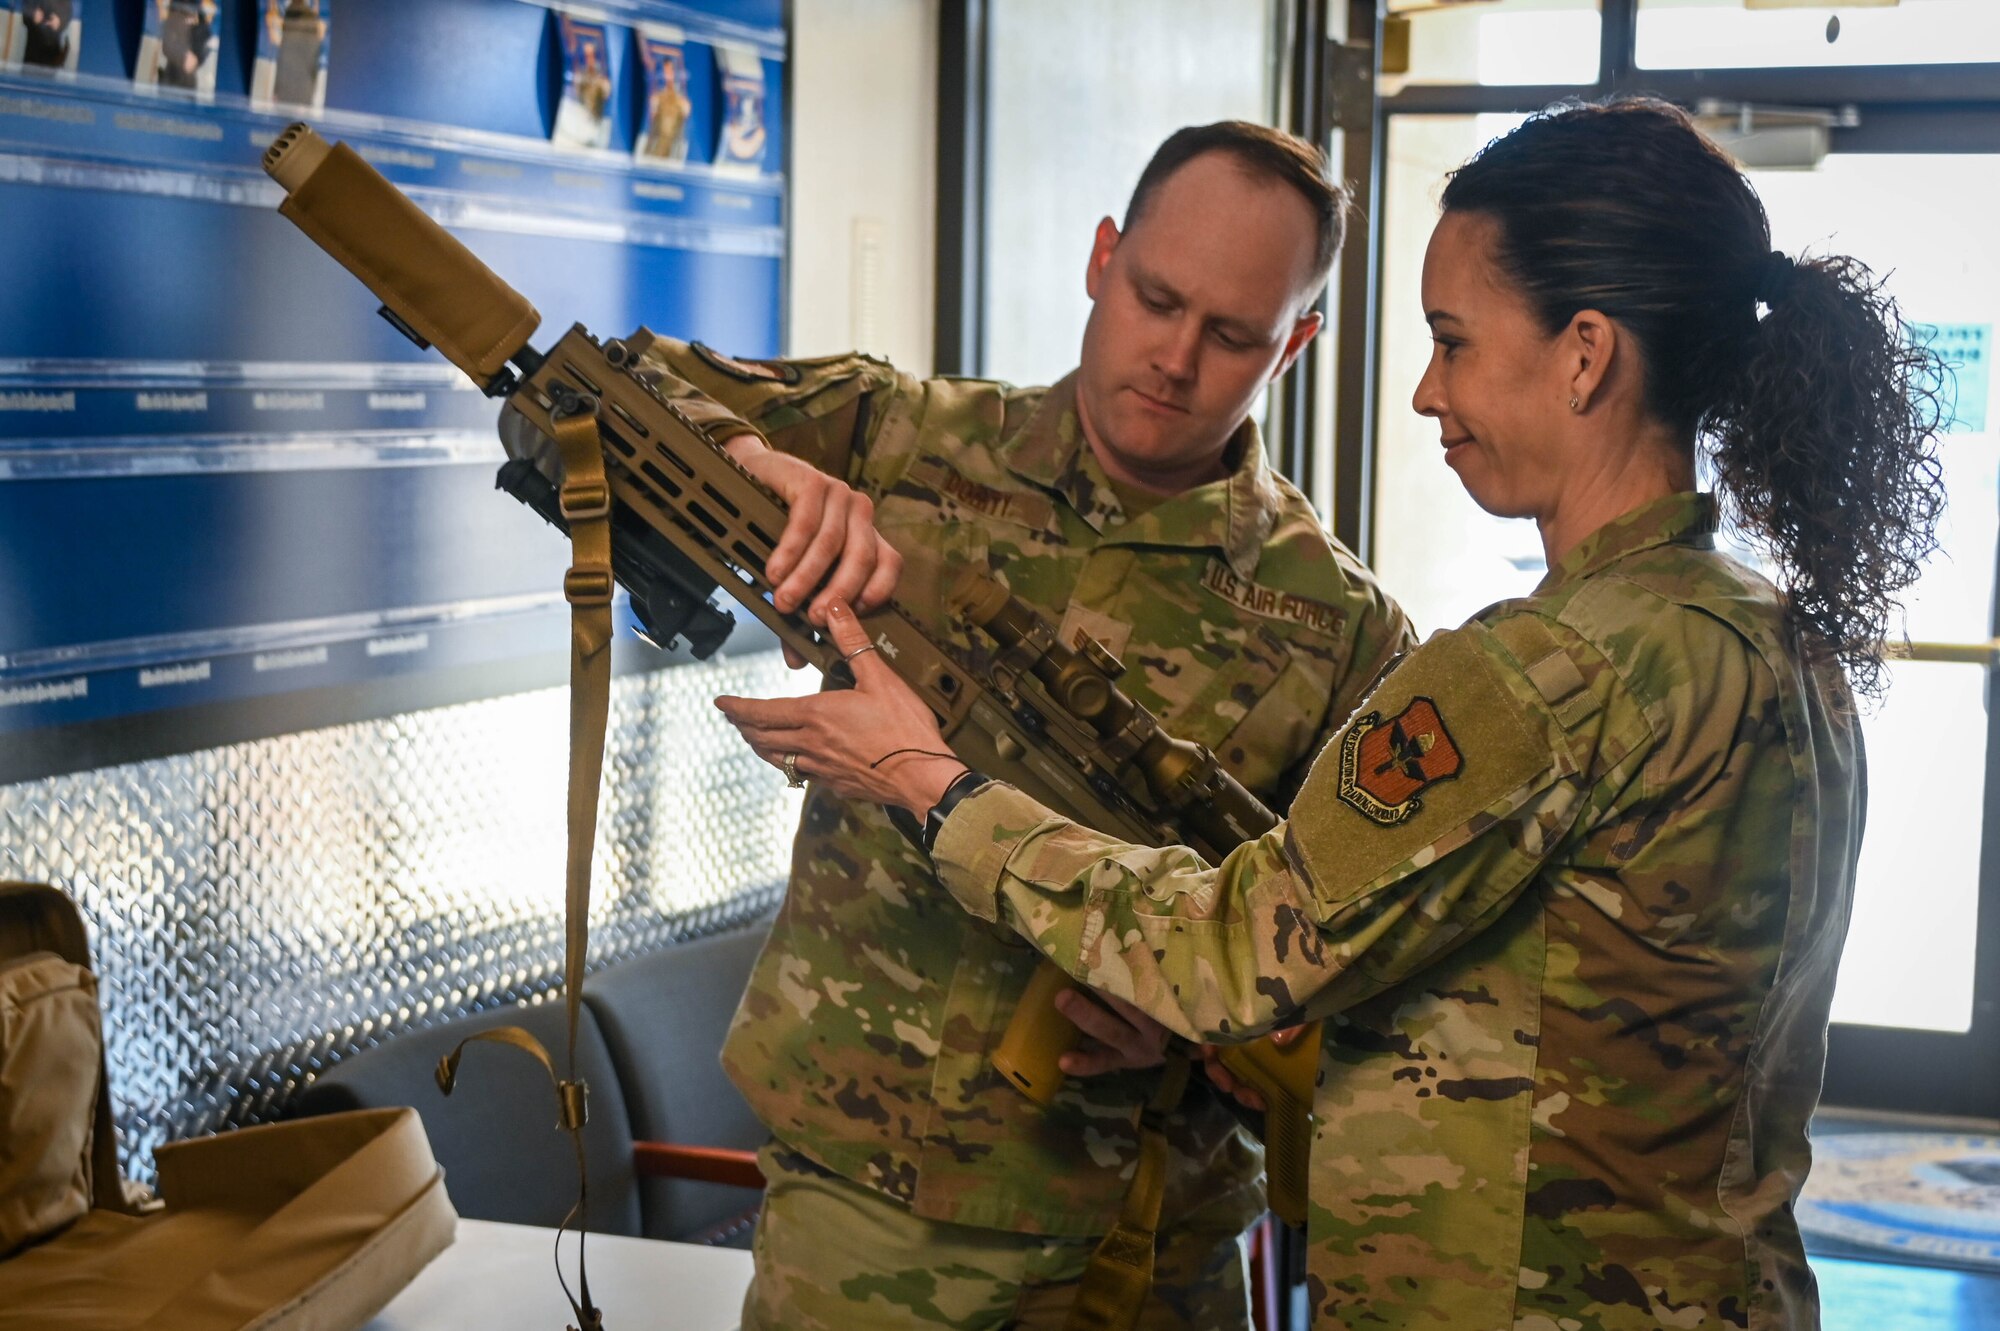 U.S. Air Force Chief Master Sgt. Kristina Rogers, 19th Air Force command chief, takes an M110-A1 advanced marksman rifle from Staff Sgt. Chance Dority, 97th Security Forces Squadron (SFS) combat arms assistance noncommissioned officer in charge, at Altus Air Force Base, Oklahoma, March 31, 2022. The 97th SFS Airmen briefed Rogers on several new items and events, such as the M110-A1 and the standard training they go through. (U.S. Air Force photo by Senior Airman Kayla Christenson)